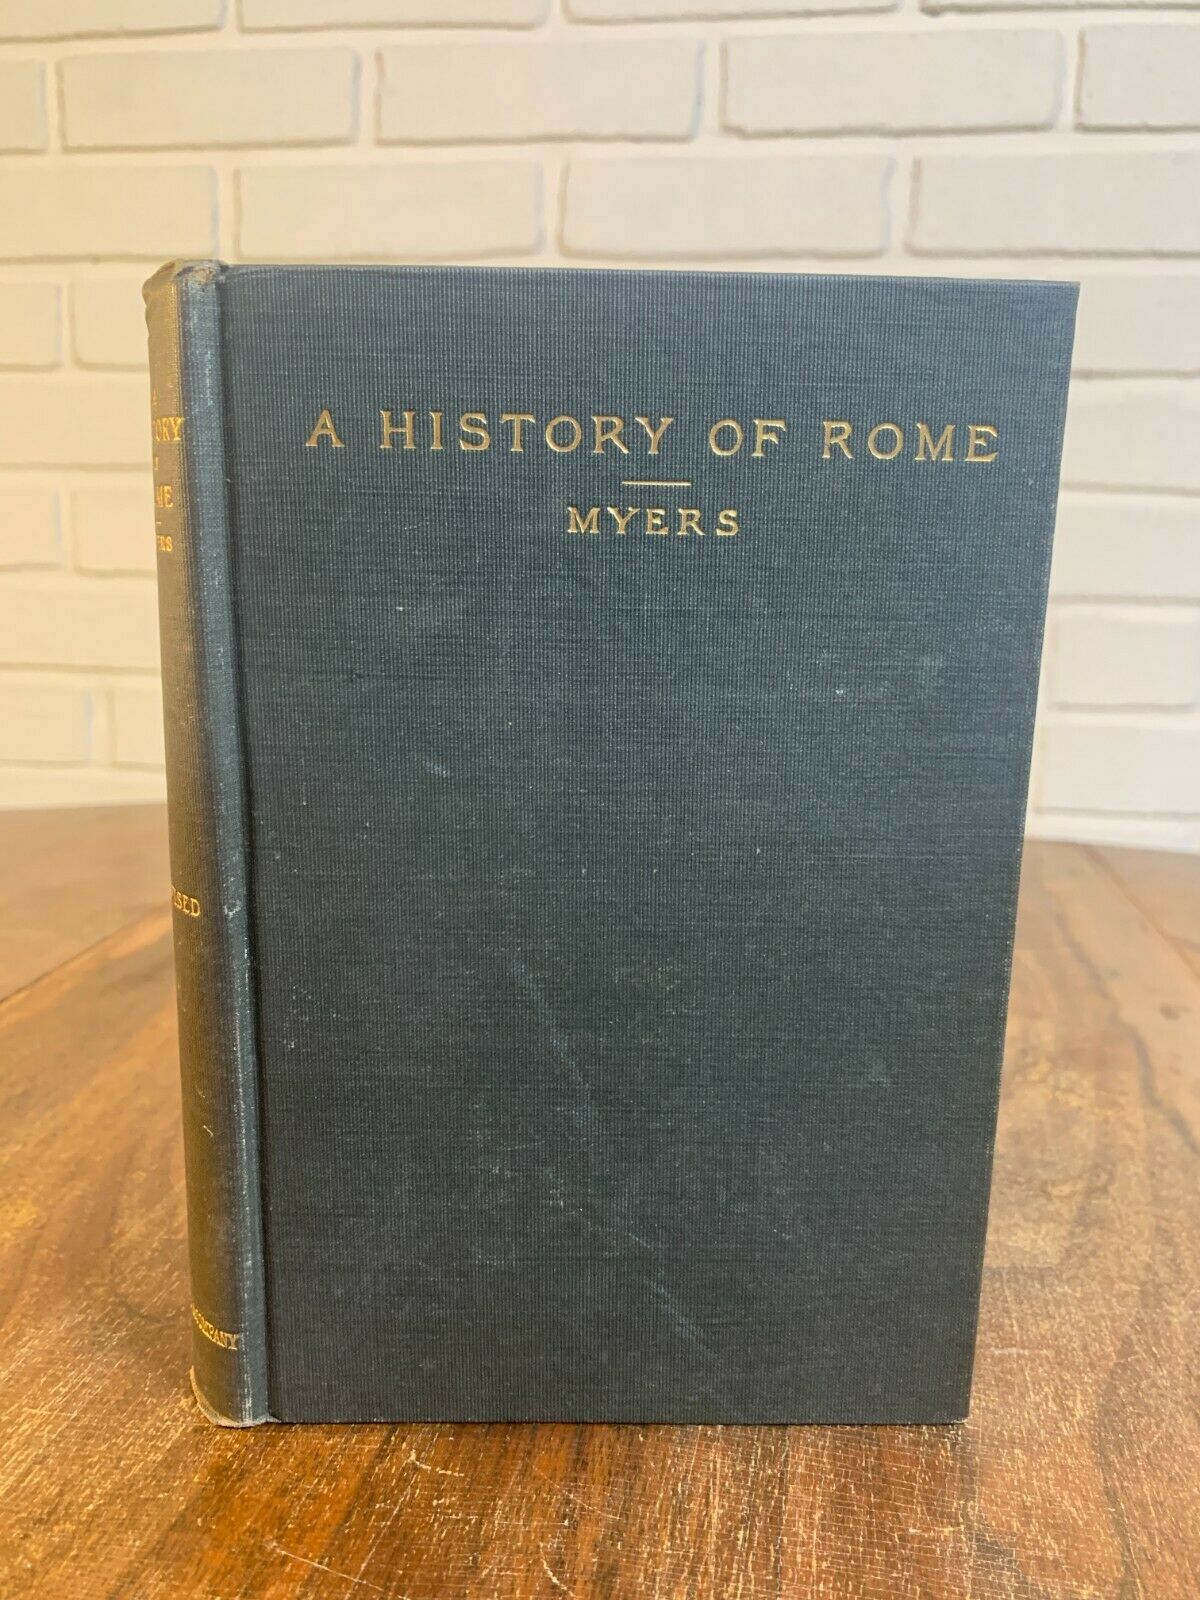 A History Of Greece, Philip Van Ness Myers, Revised Edition, 1904, HS9